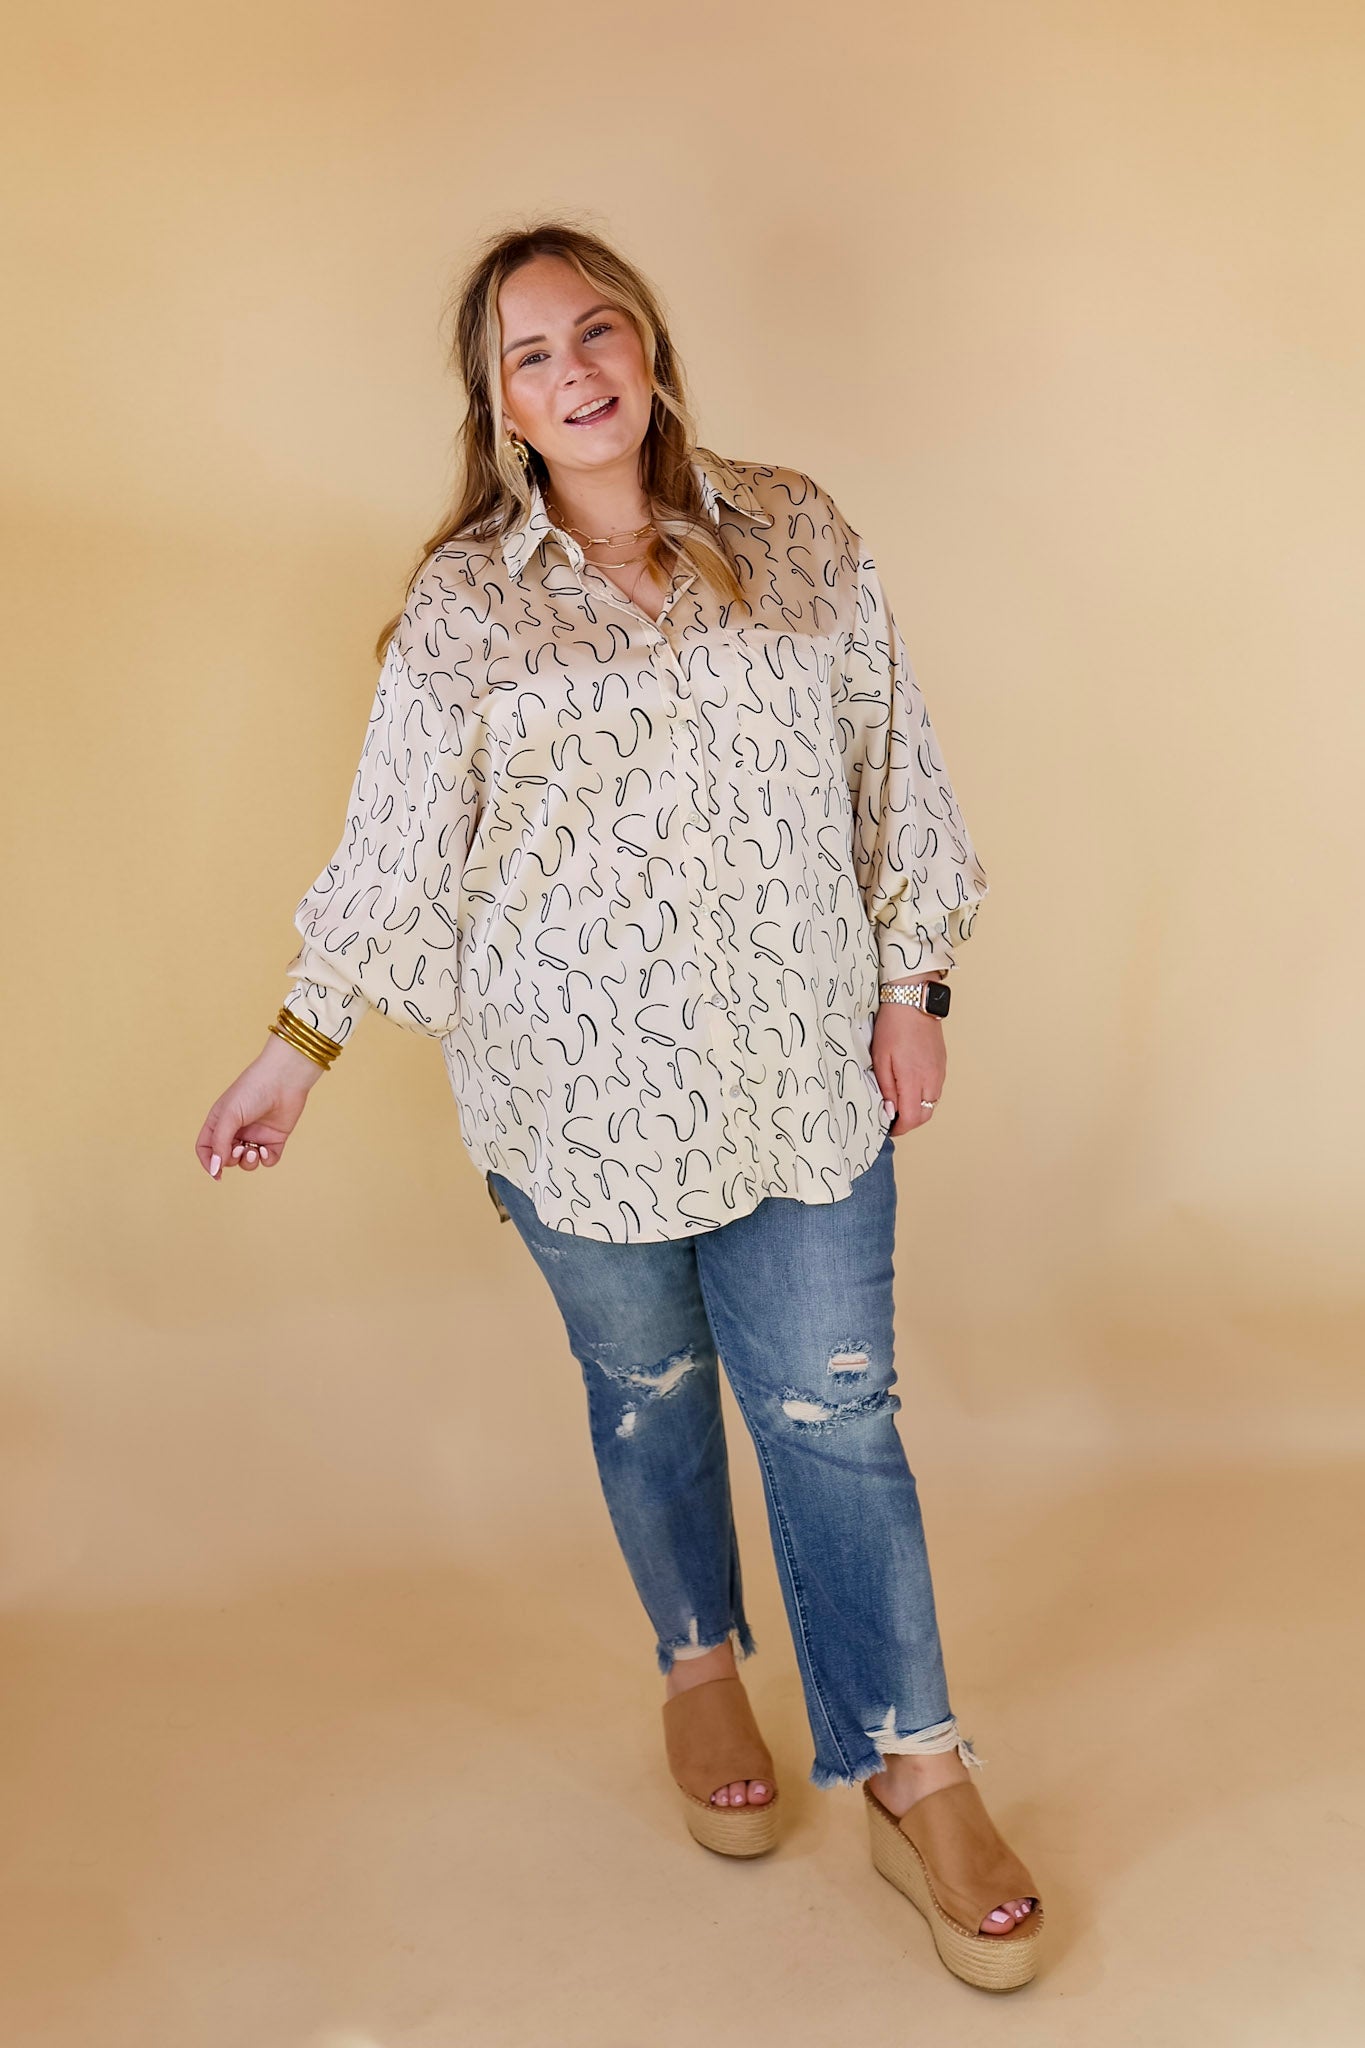 Endlessly Obsessed Satin Button Up Swirl Print Top in Ivory - Giddy Up Glamour Boutique